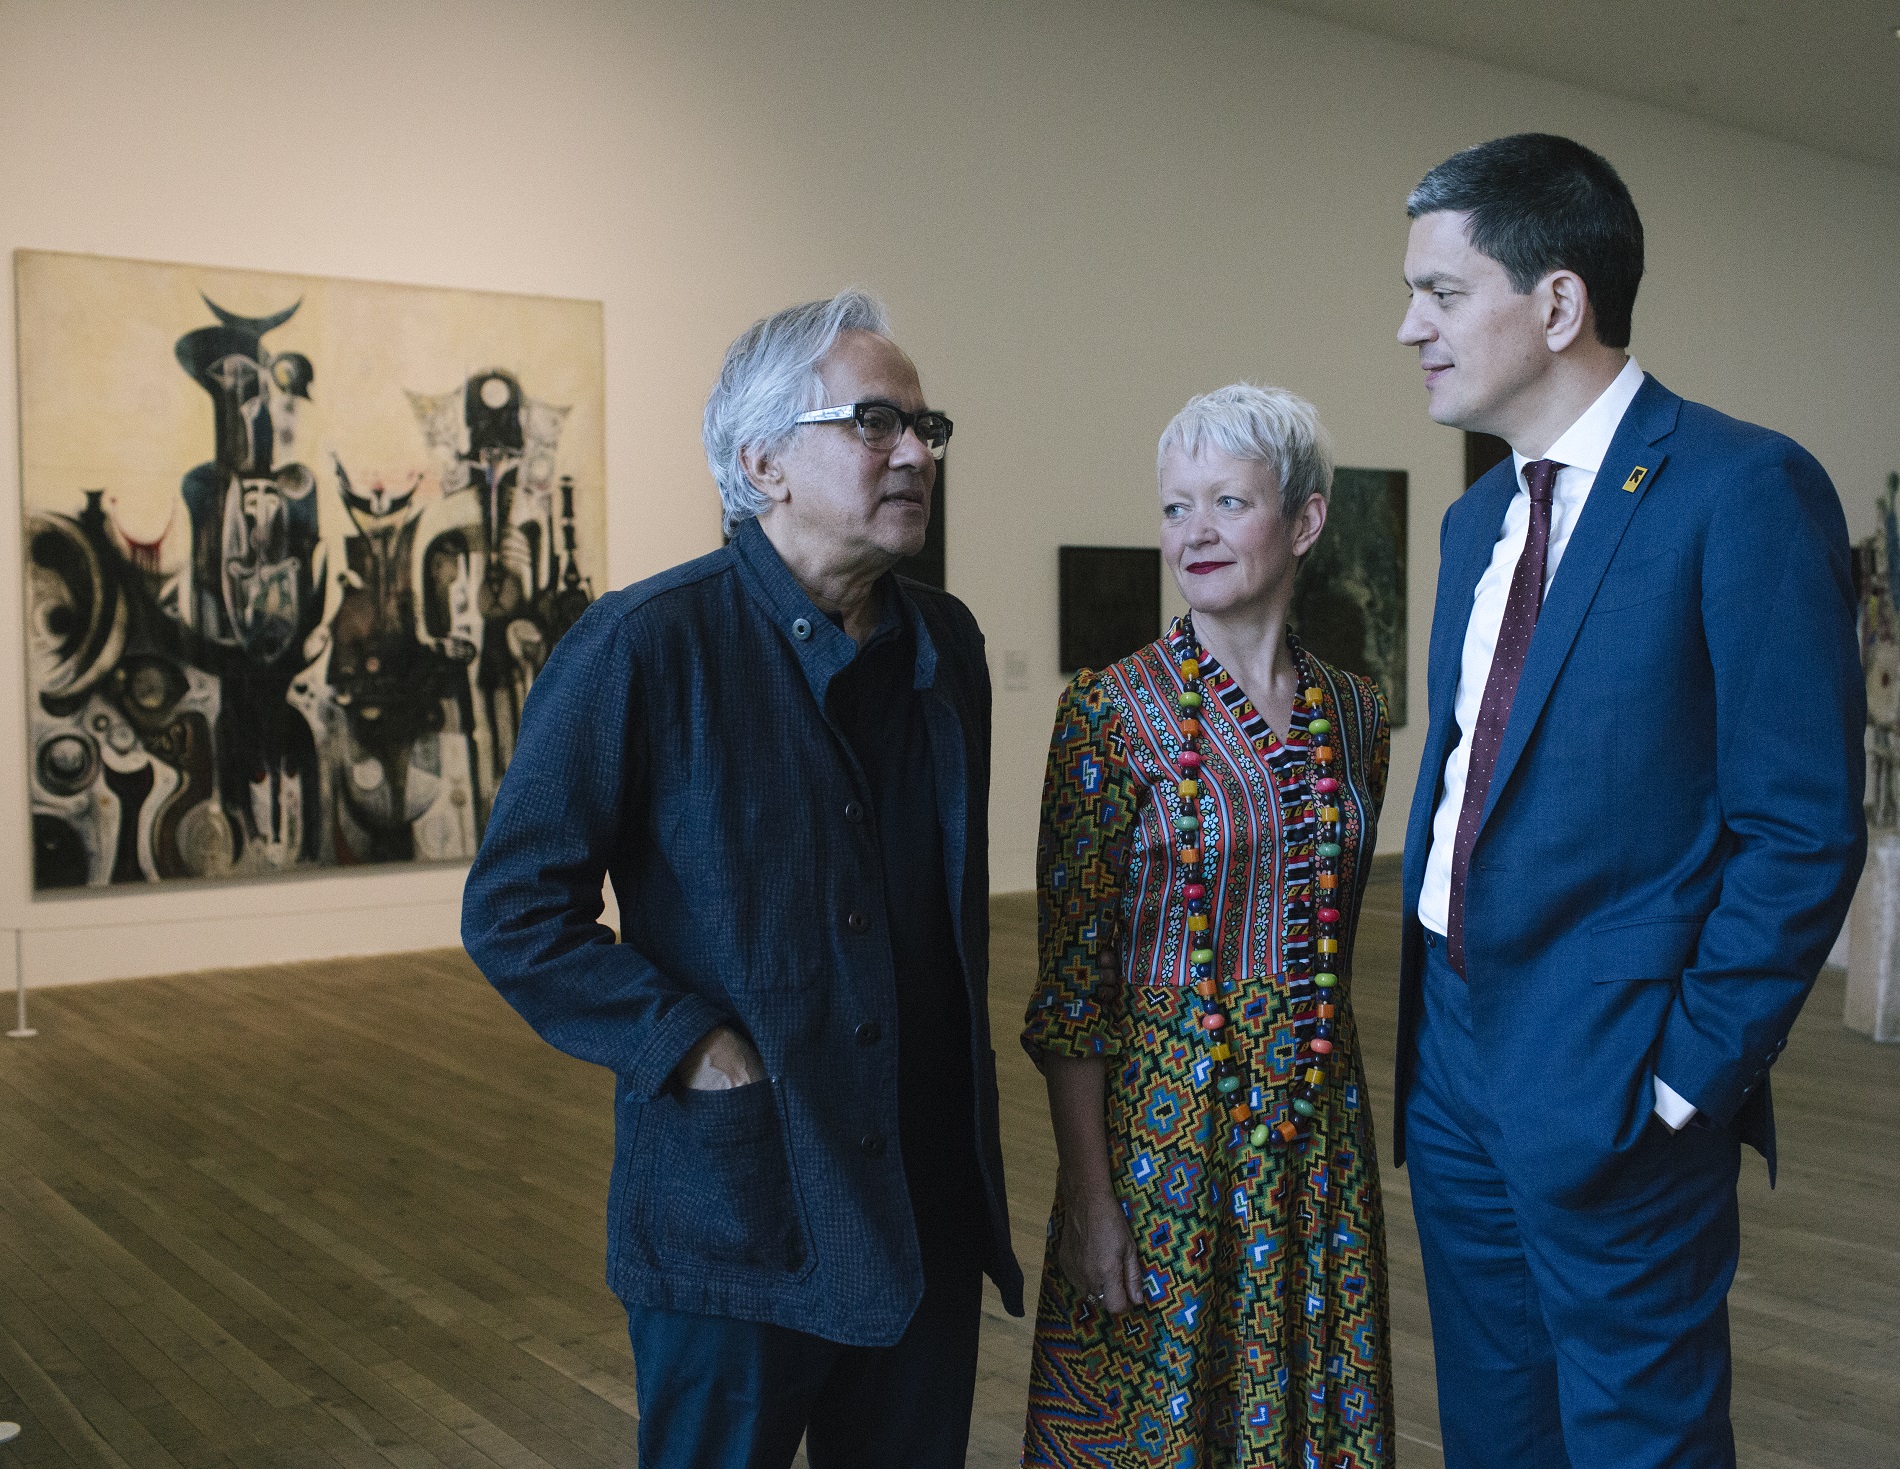 Sir Anish Kapoor, David Miliband and Maria Balshaw at Tate Modern to mark World Refugee Day with the International Rescue Committee